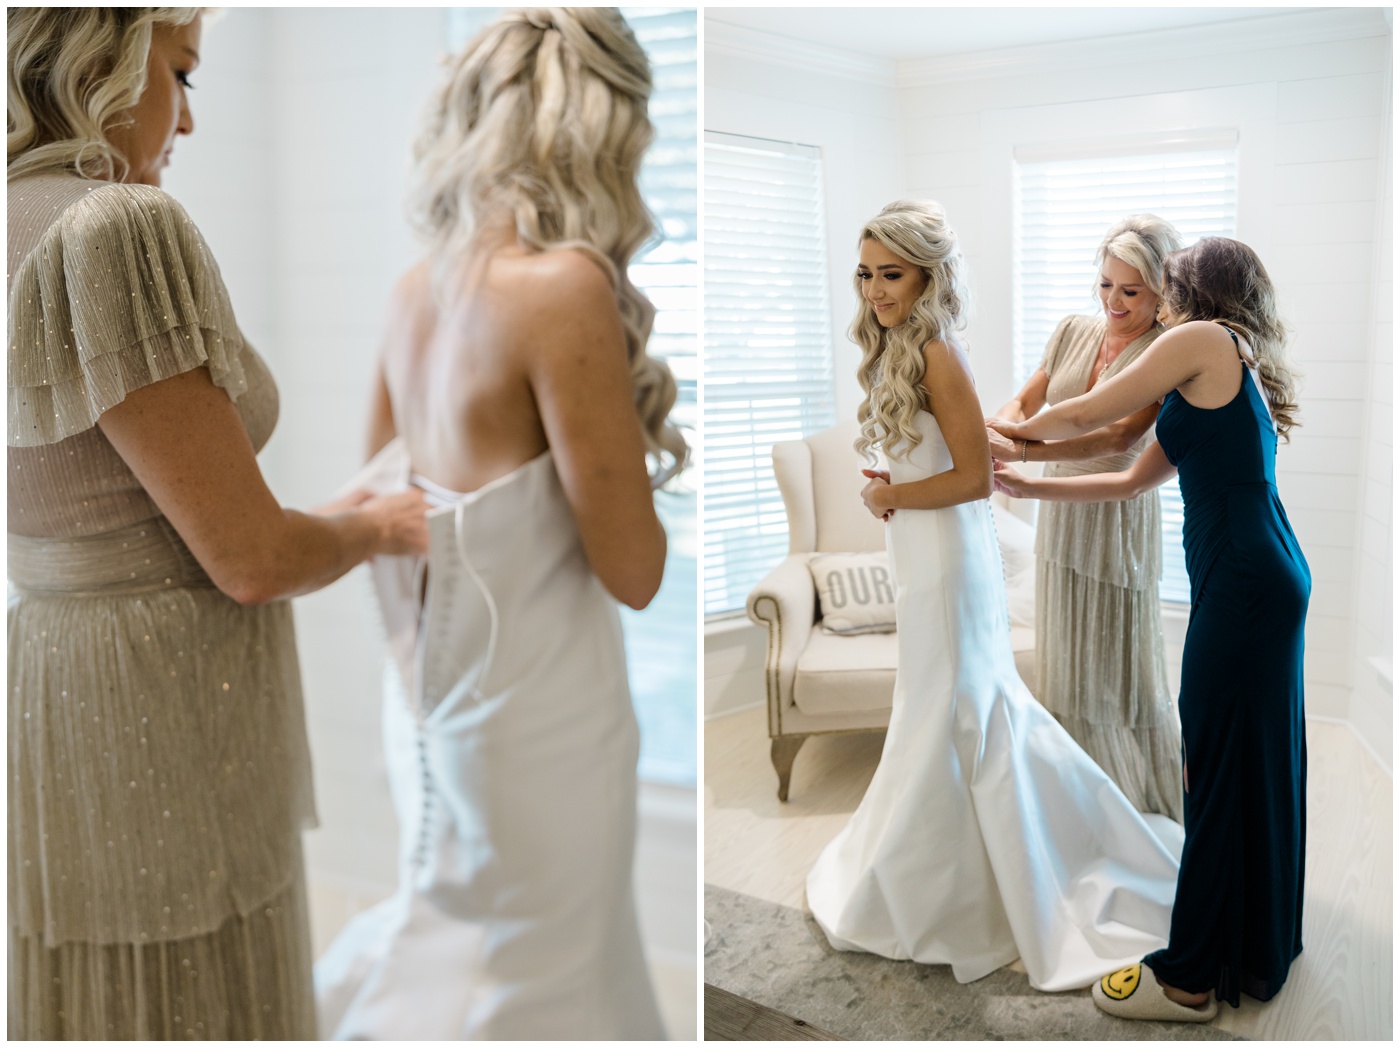 Houston Wedding Photographer | A bride puts her dress on on her wedding day with the help of her mom and sister